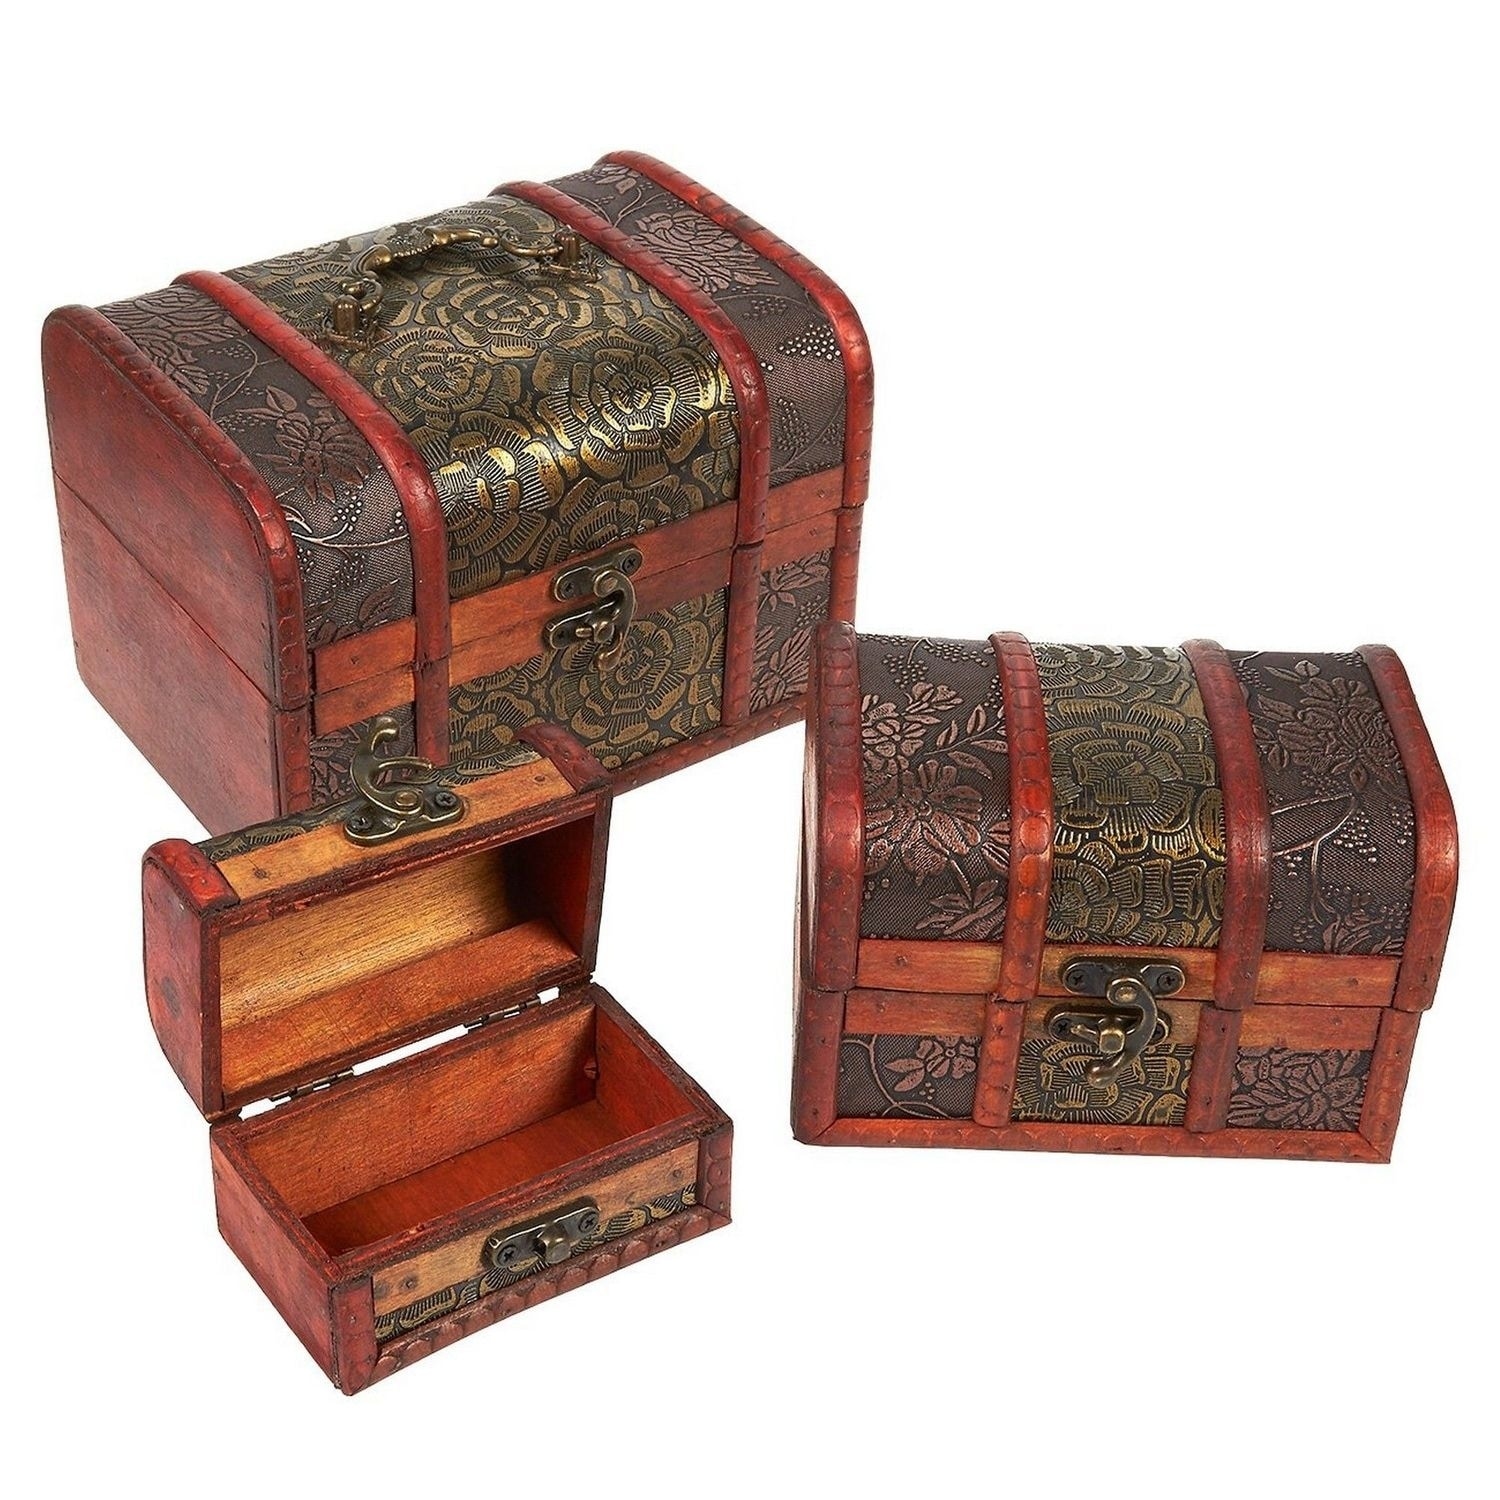 Set of 3 Small Wooden Treasure Chest Boxes, Decorative Vintage Style Storage Box